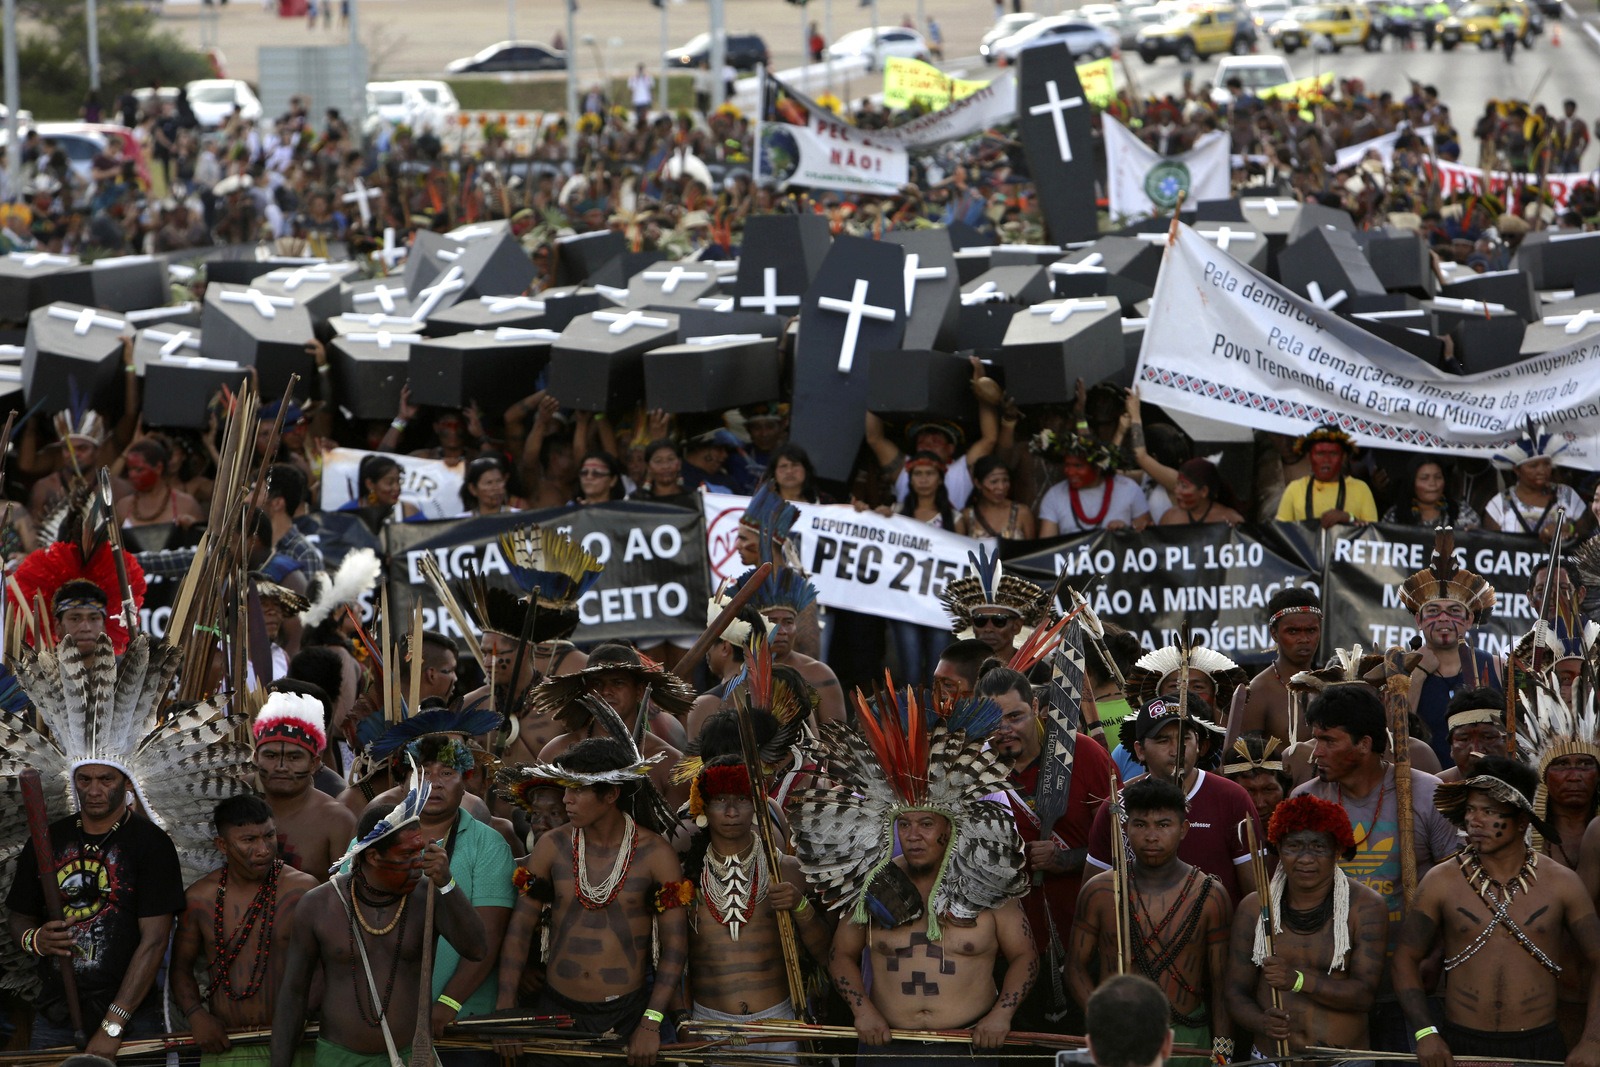 Indigenous protesters from various ethnic groups carry coffins representing indians killed over the demarcation of land, as they demand the demarcation of indigenous lands, outside the National Congress in Brasilia, Brazil. In May, Congress passed two measures that convert around 1.4 million acres of protected land, the vast majority of it in the Amazon, into areas open to logging, mining and agricultural use. (AP/Eraldo Peres)